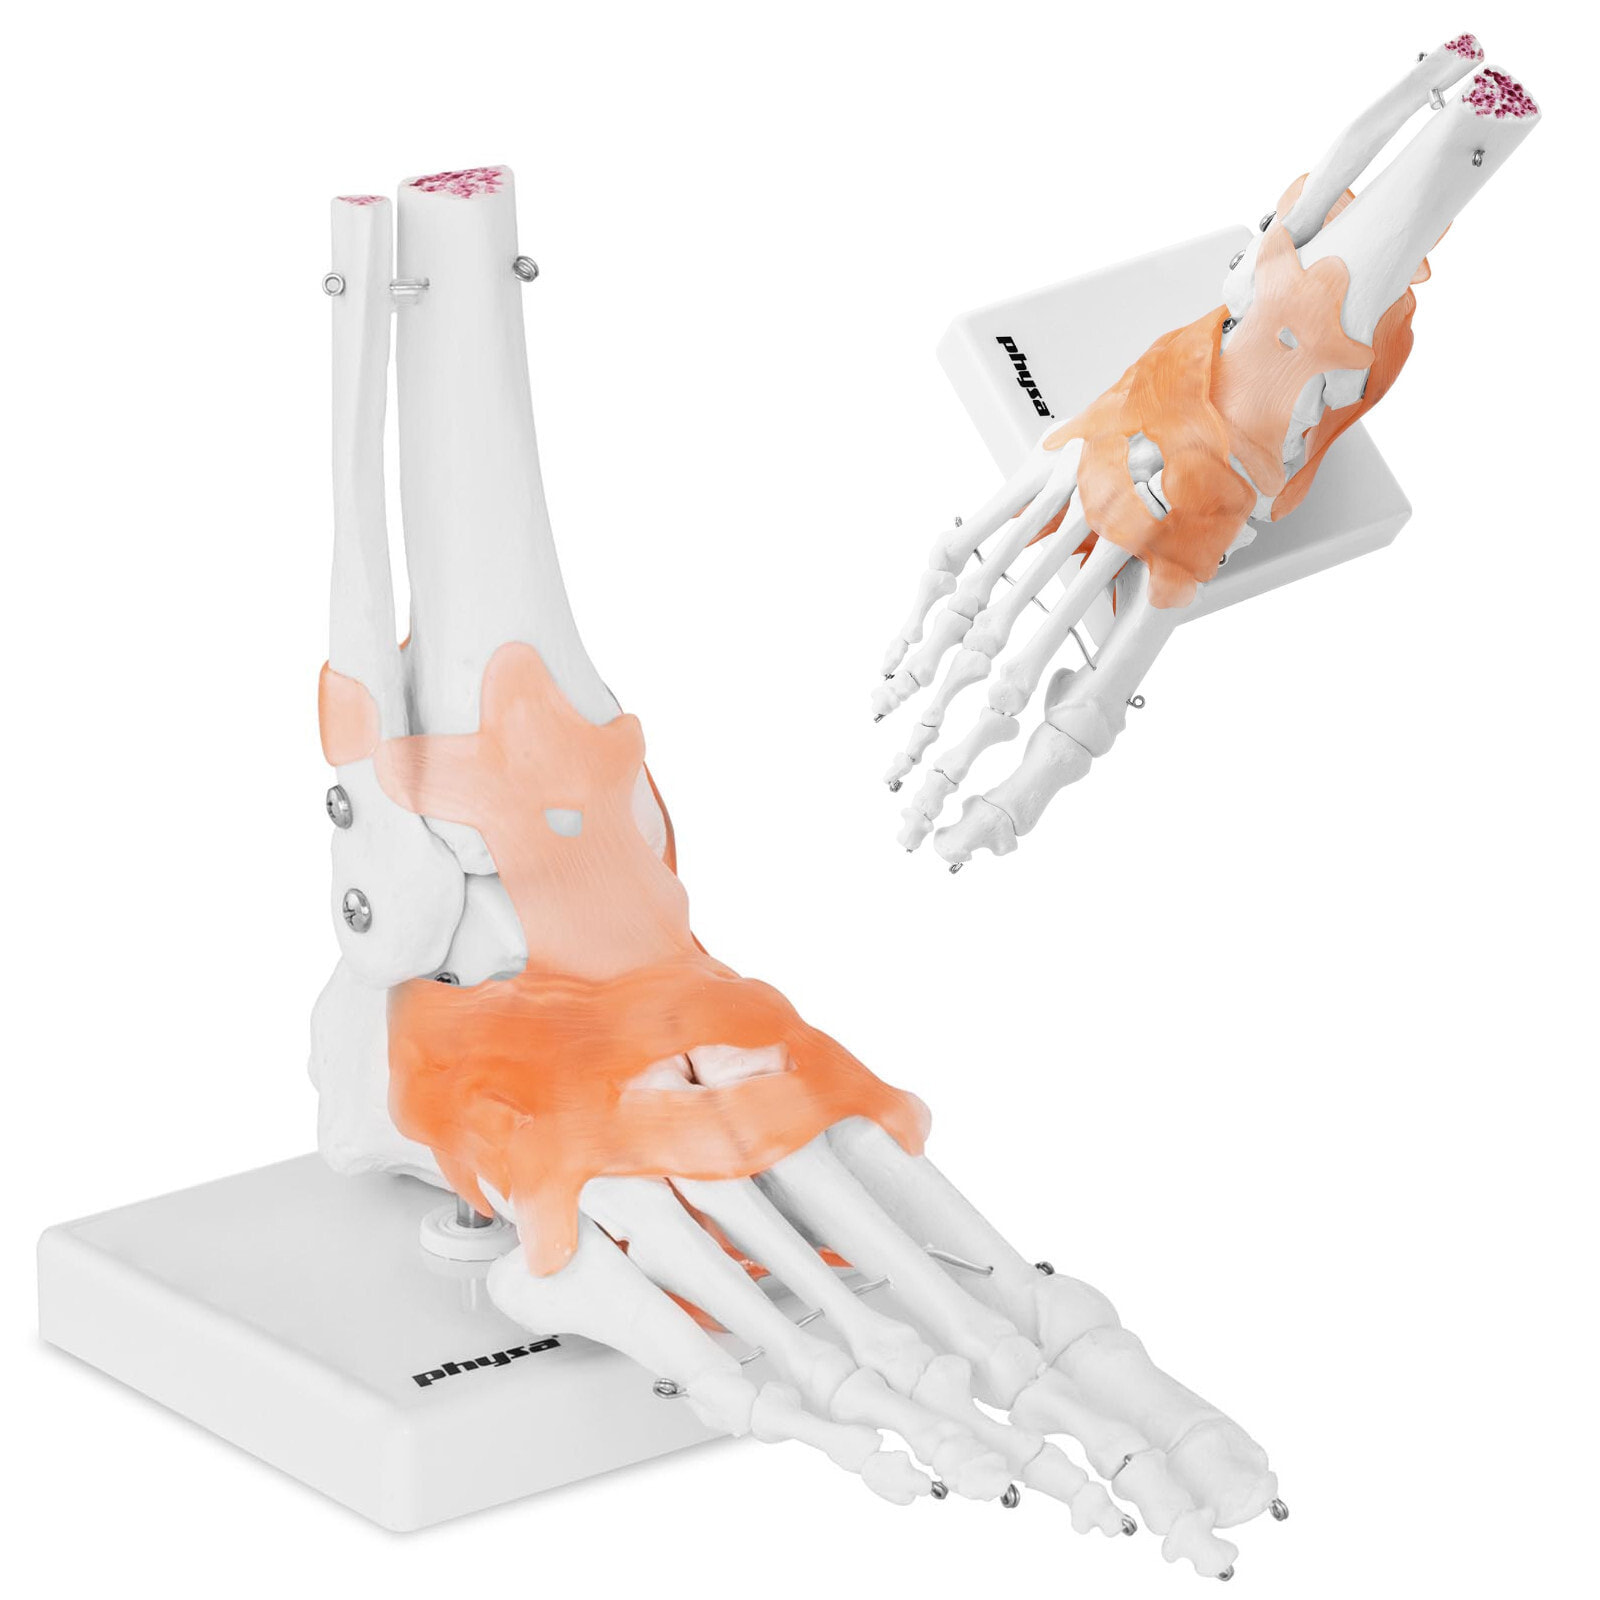 Anatomical model of the ankle joint with ligaments, scale 1: 1